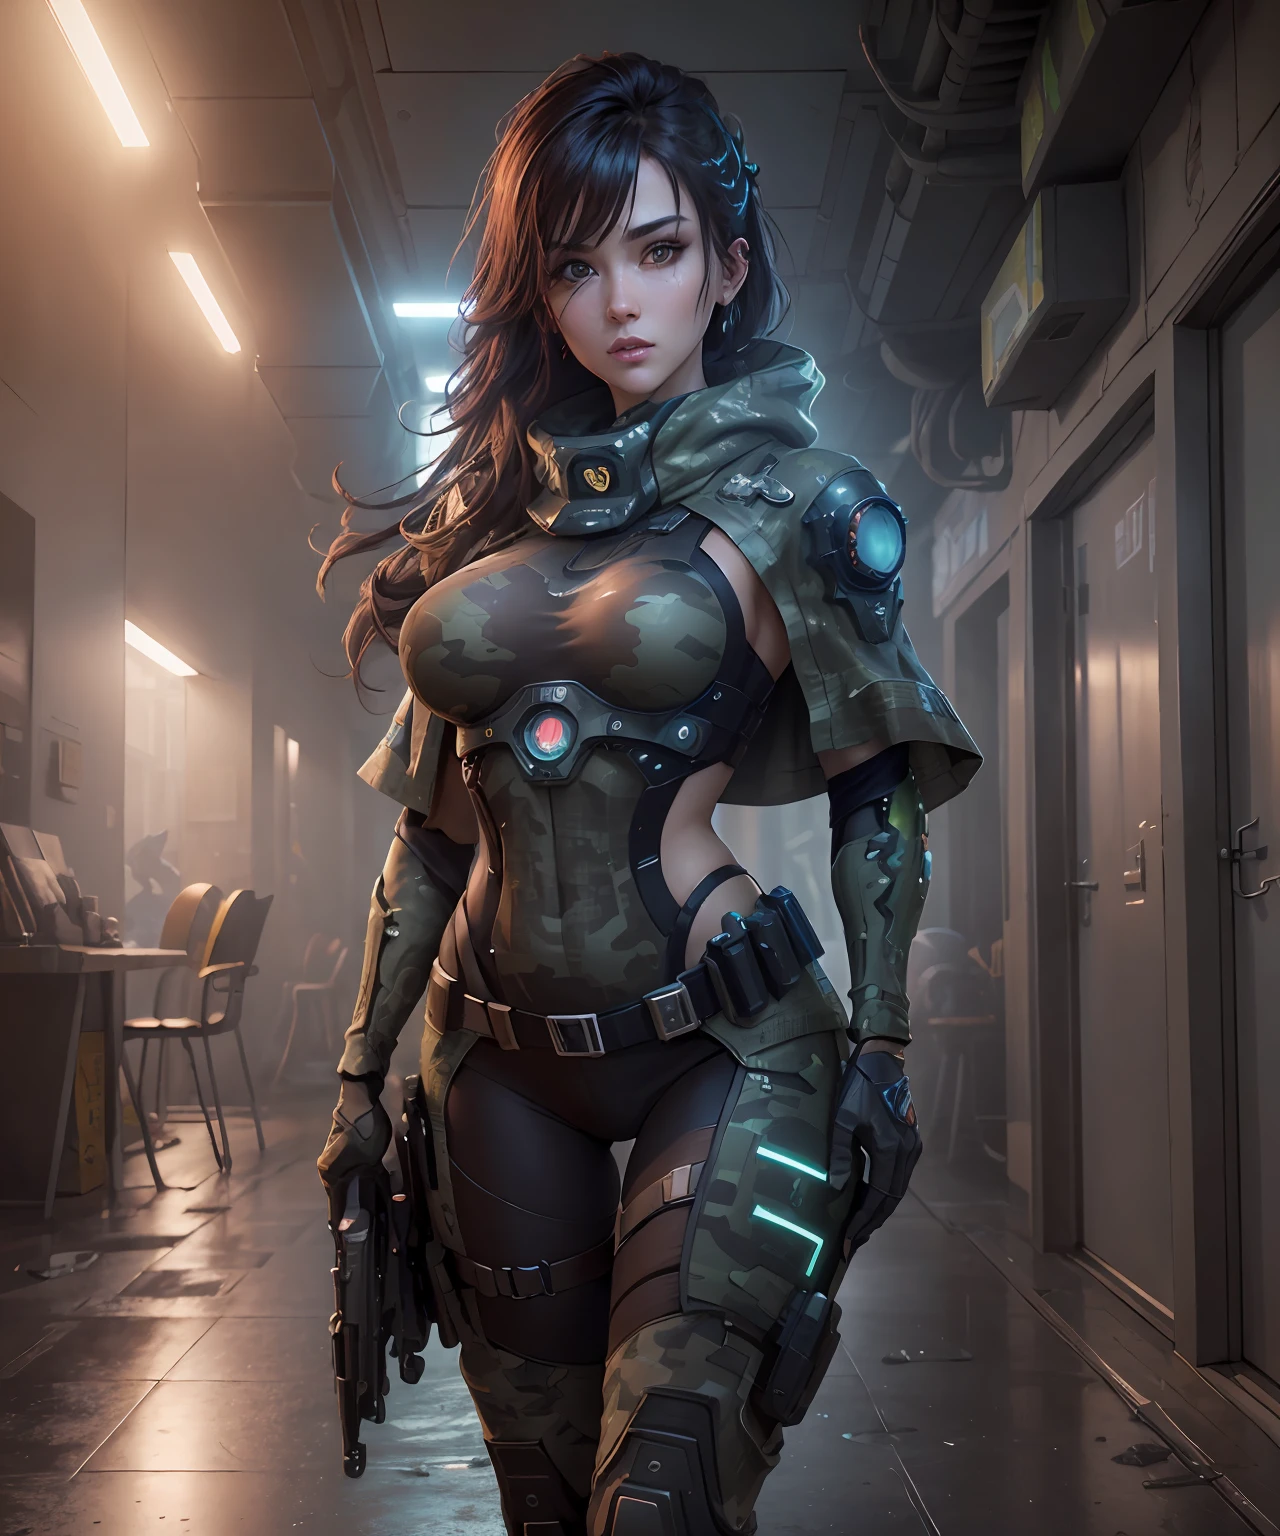 ((Best quality)), ((masterpiece)), (highly detailed:1.3), 3D, beautiful (cyberpunk:1.2) special forces, robort,female with thick voluminous hair wearing (wearing camouflage_uniform:1.1), body armour,cape,digital (camouflage:1.3),HDR (High Dynamic Range),Ray Tracing,NVIDIA RTX,Super-Resolution,Unreal 5,Subsurface scattering,PBR Texturing,Post-processing,Anisotropic Filtering,Depth-of-field,Maximum clarity and sharpness,Multi-layered textures,Albedo and Specular maps,Surface shading,Accurate simulation of light-material interaction,Perfect proportions,Octane Render,Two-tone lighting,Wide aperture,Low ISO,White balance,Rule of thirds,8K RAW,Efficient Sub-Pixel,sub-pixel convolution,